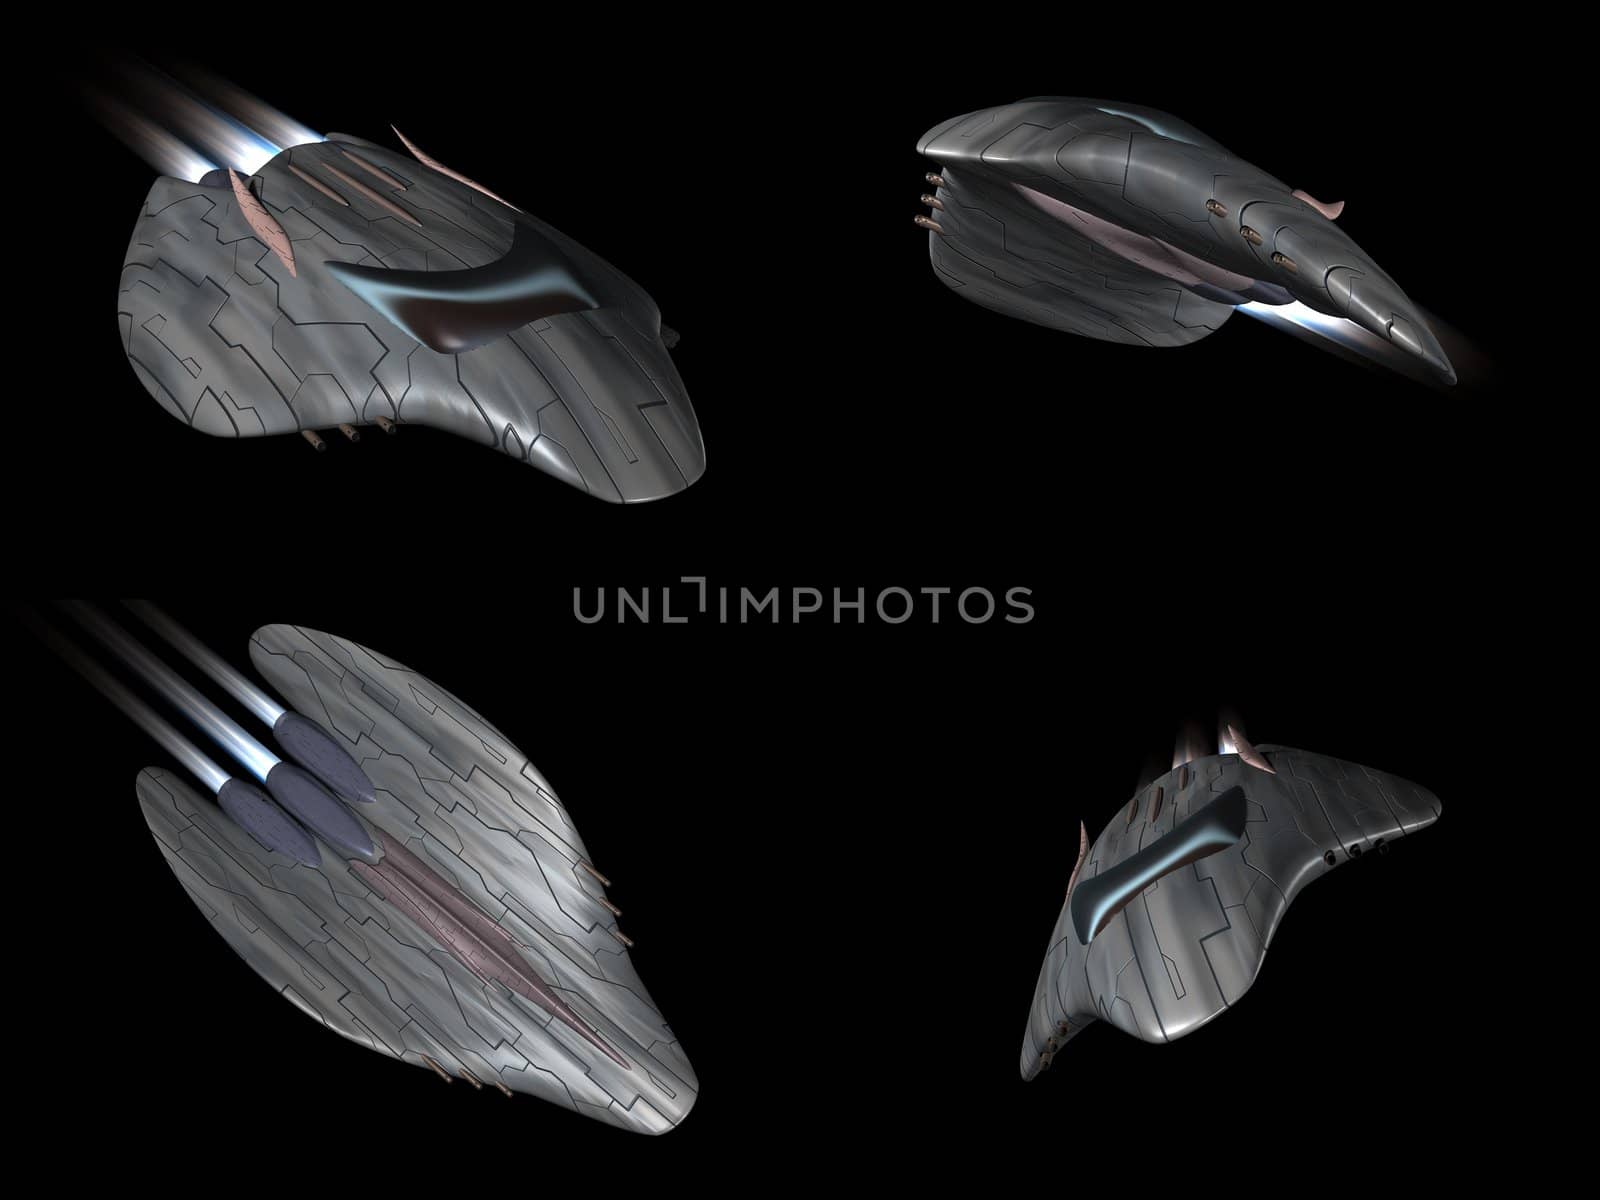 Four views of a powerful spaceship by shkyo30